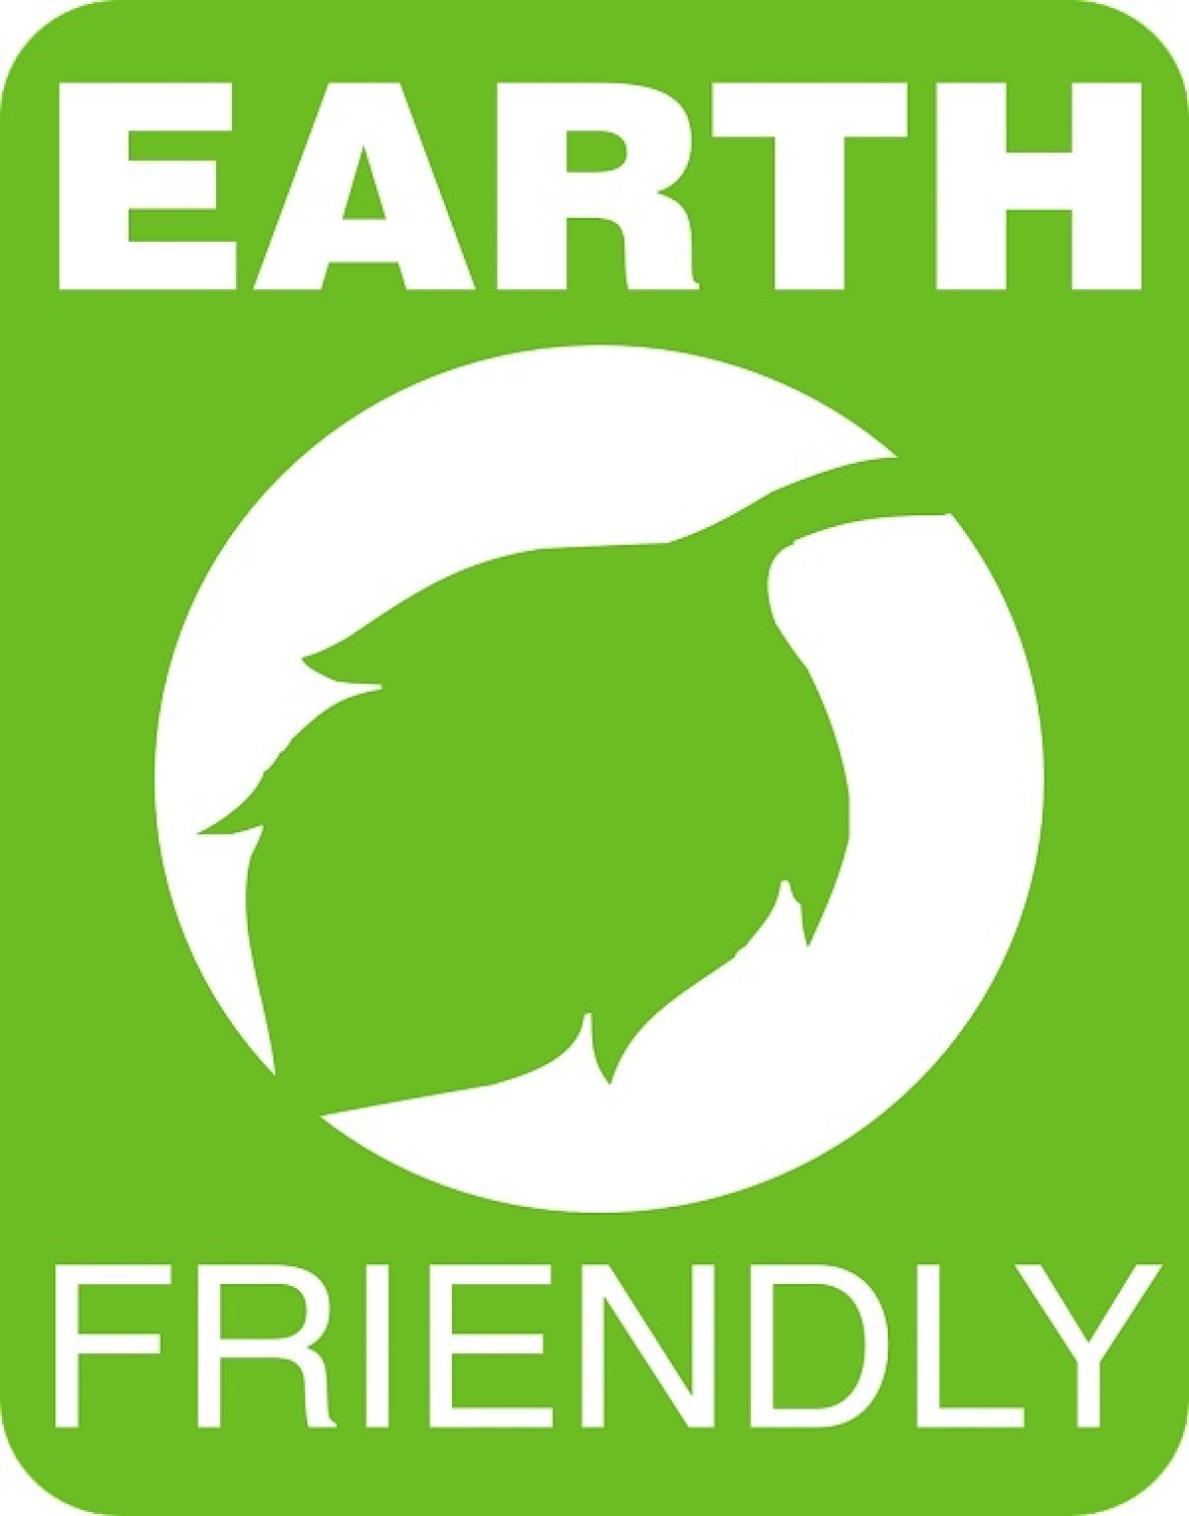 How Can I Make My Website More Eco-Friendly?